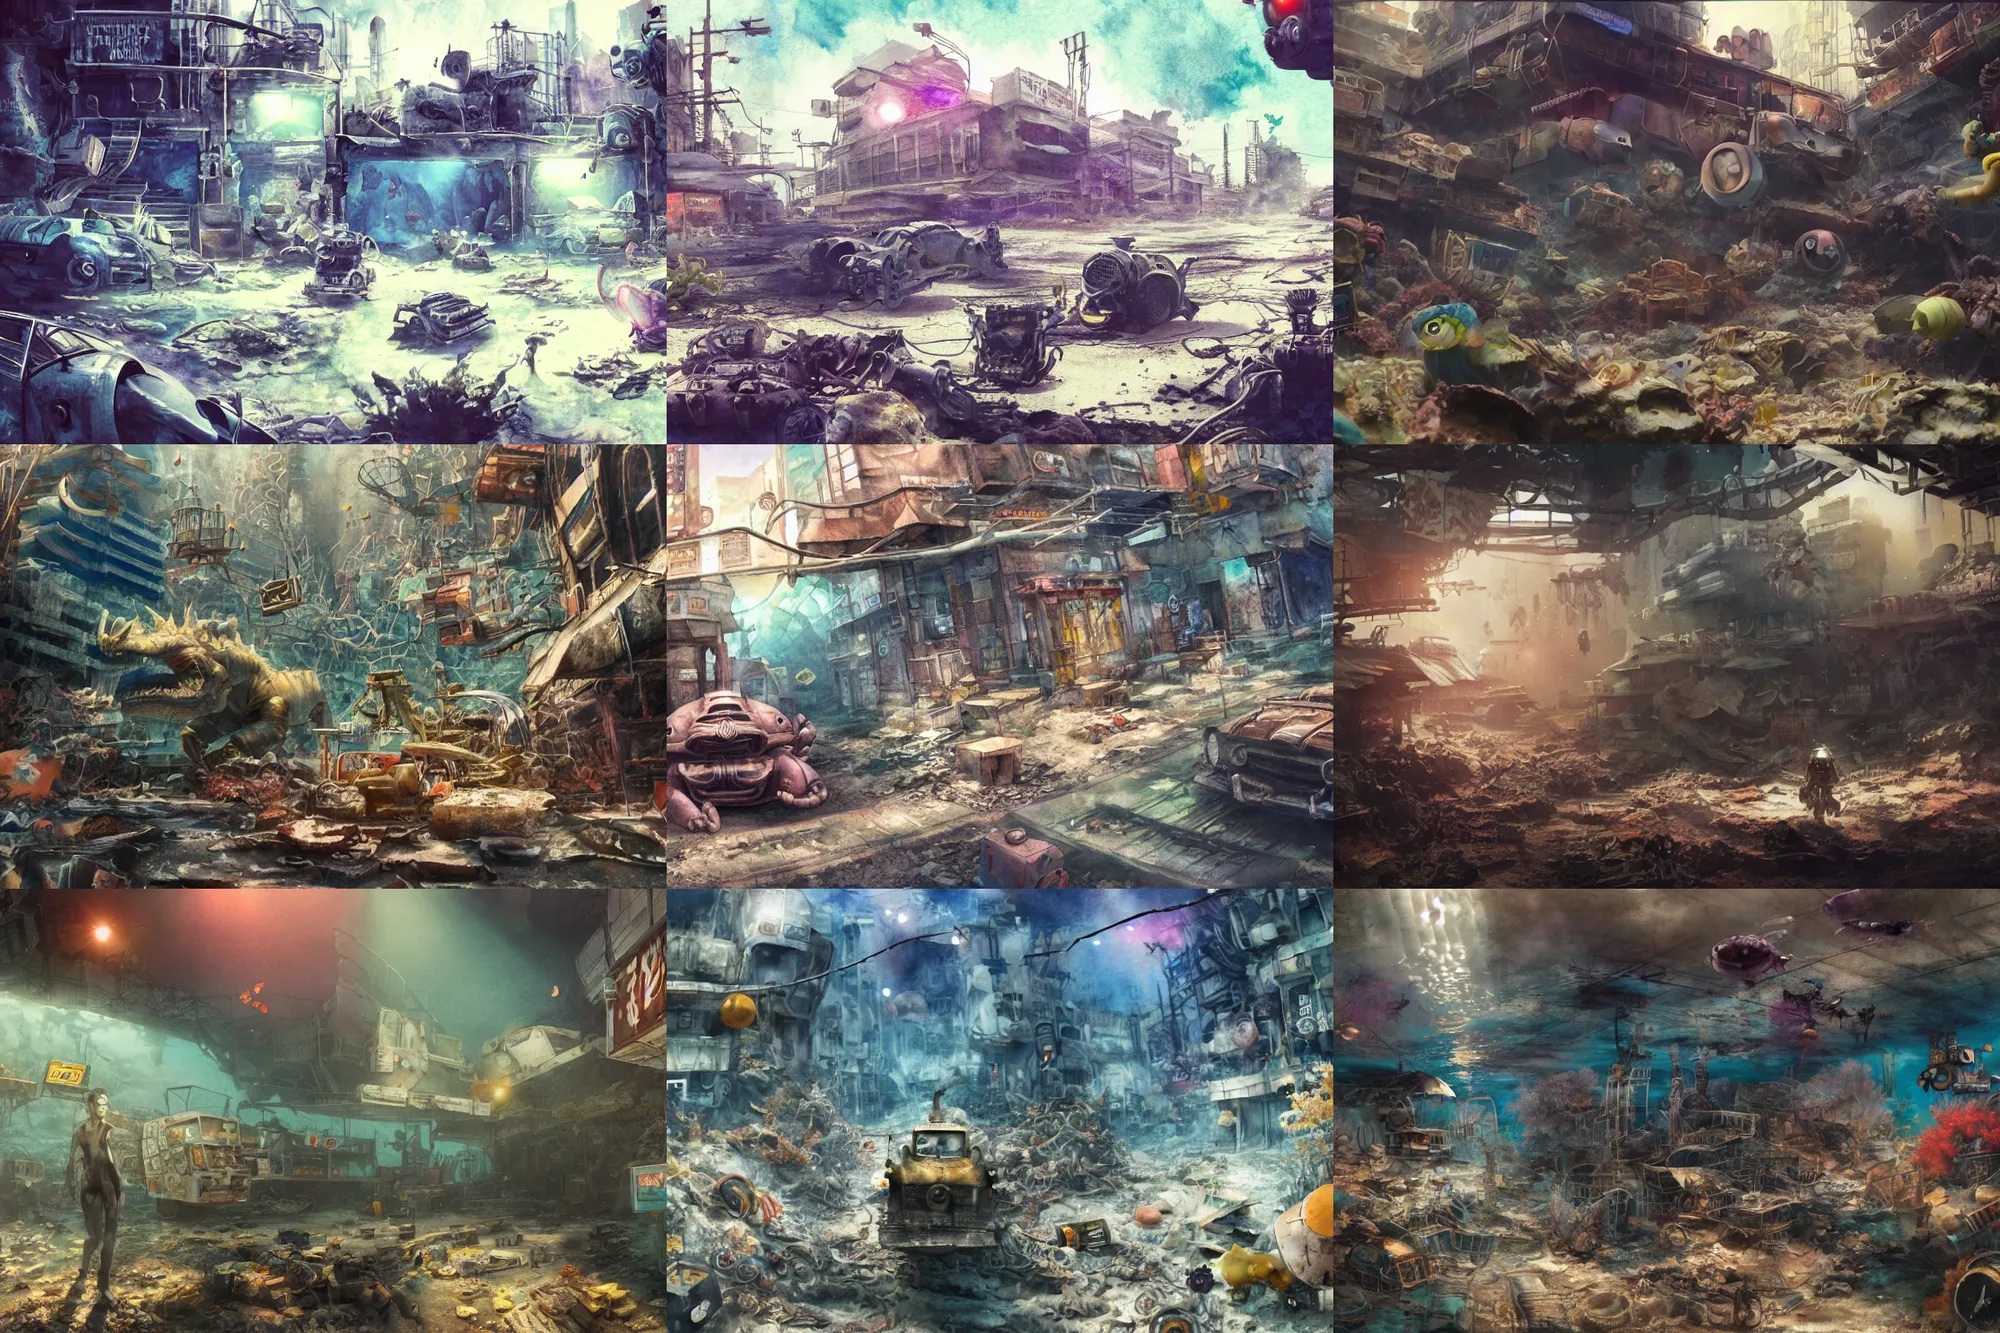 Prompt: incredible underwater exploration, watercolor, harsh bloom lighting, rim light, abandoned city, paper texture, movie scene, caustics shadows, deserted shinjuku junk town, old pawn shop, bright sun bleached ground, phantom crash, dragon festival, robot monster lurks in the background